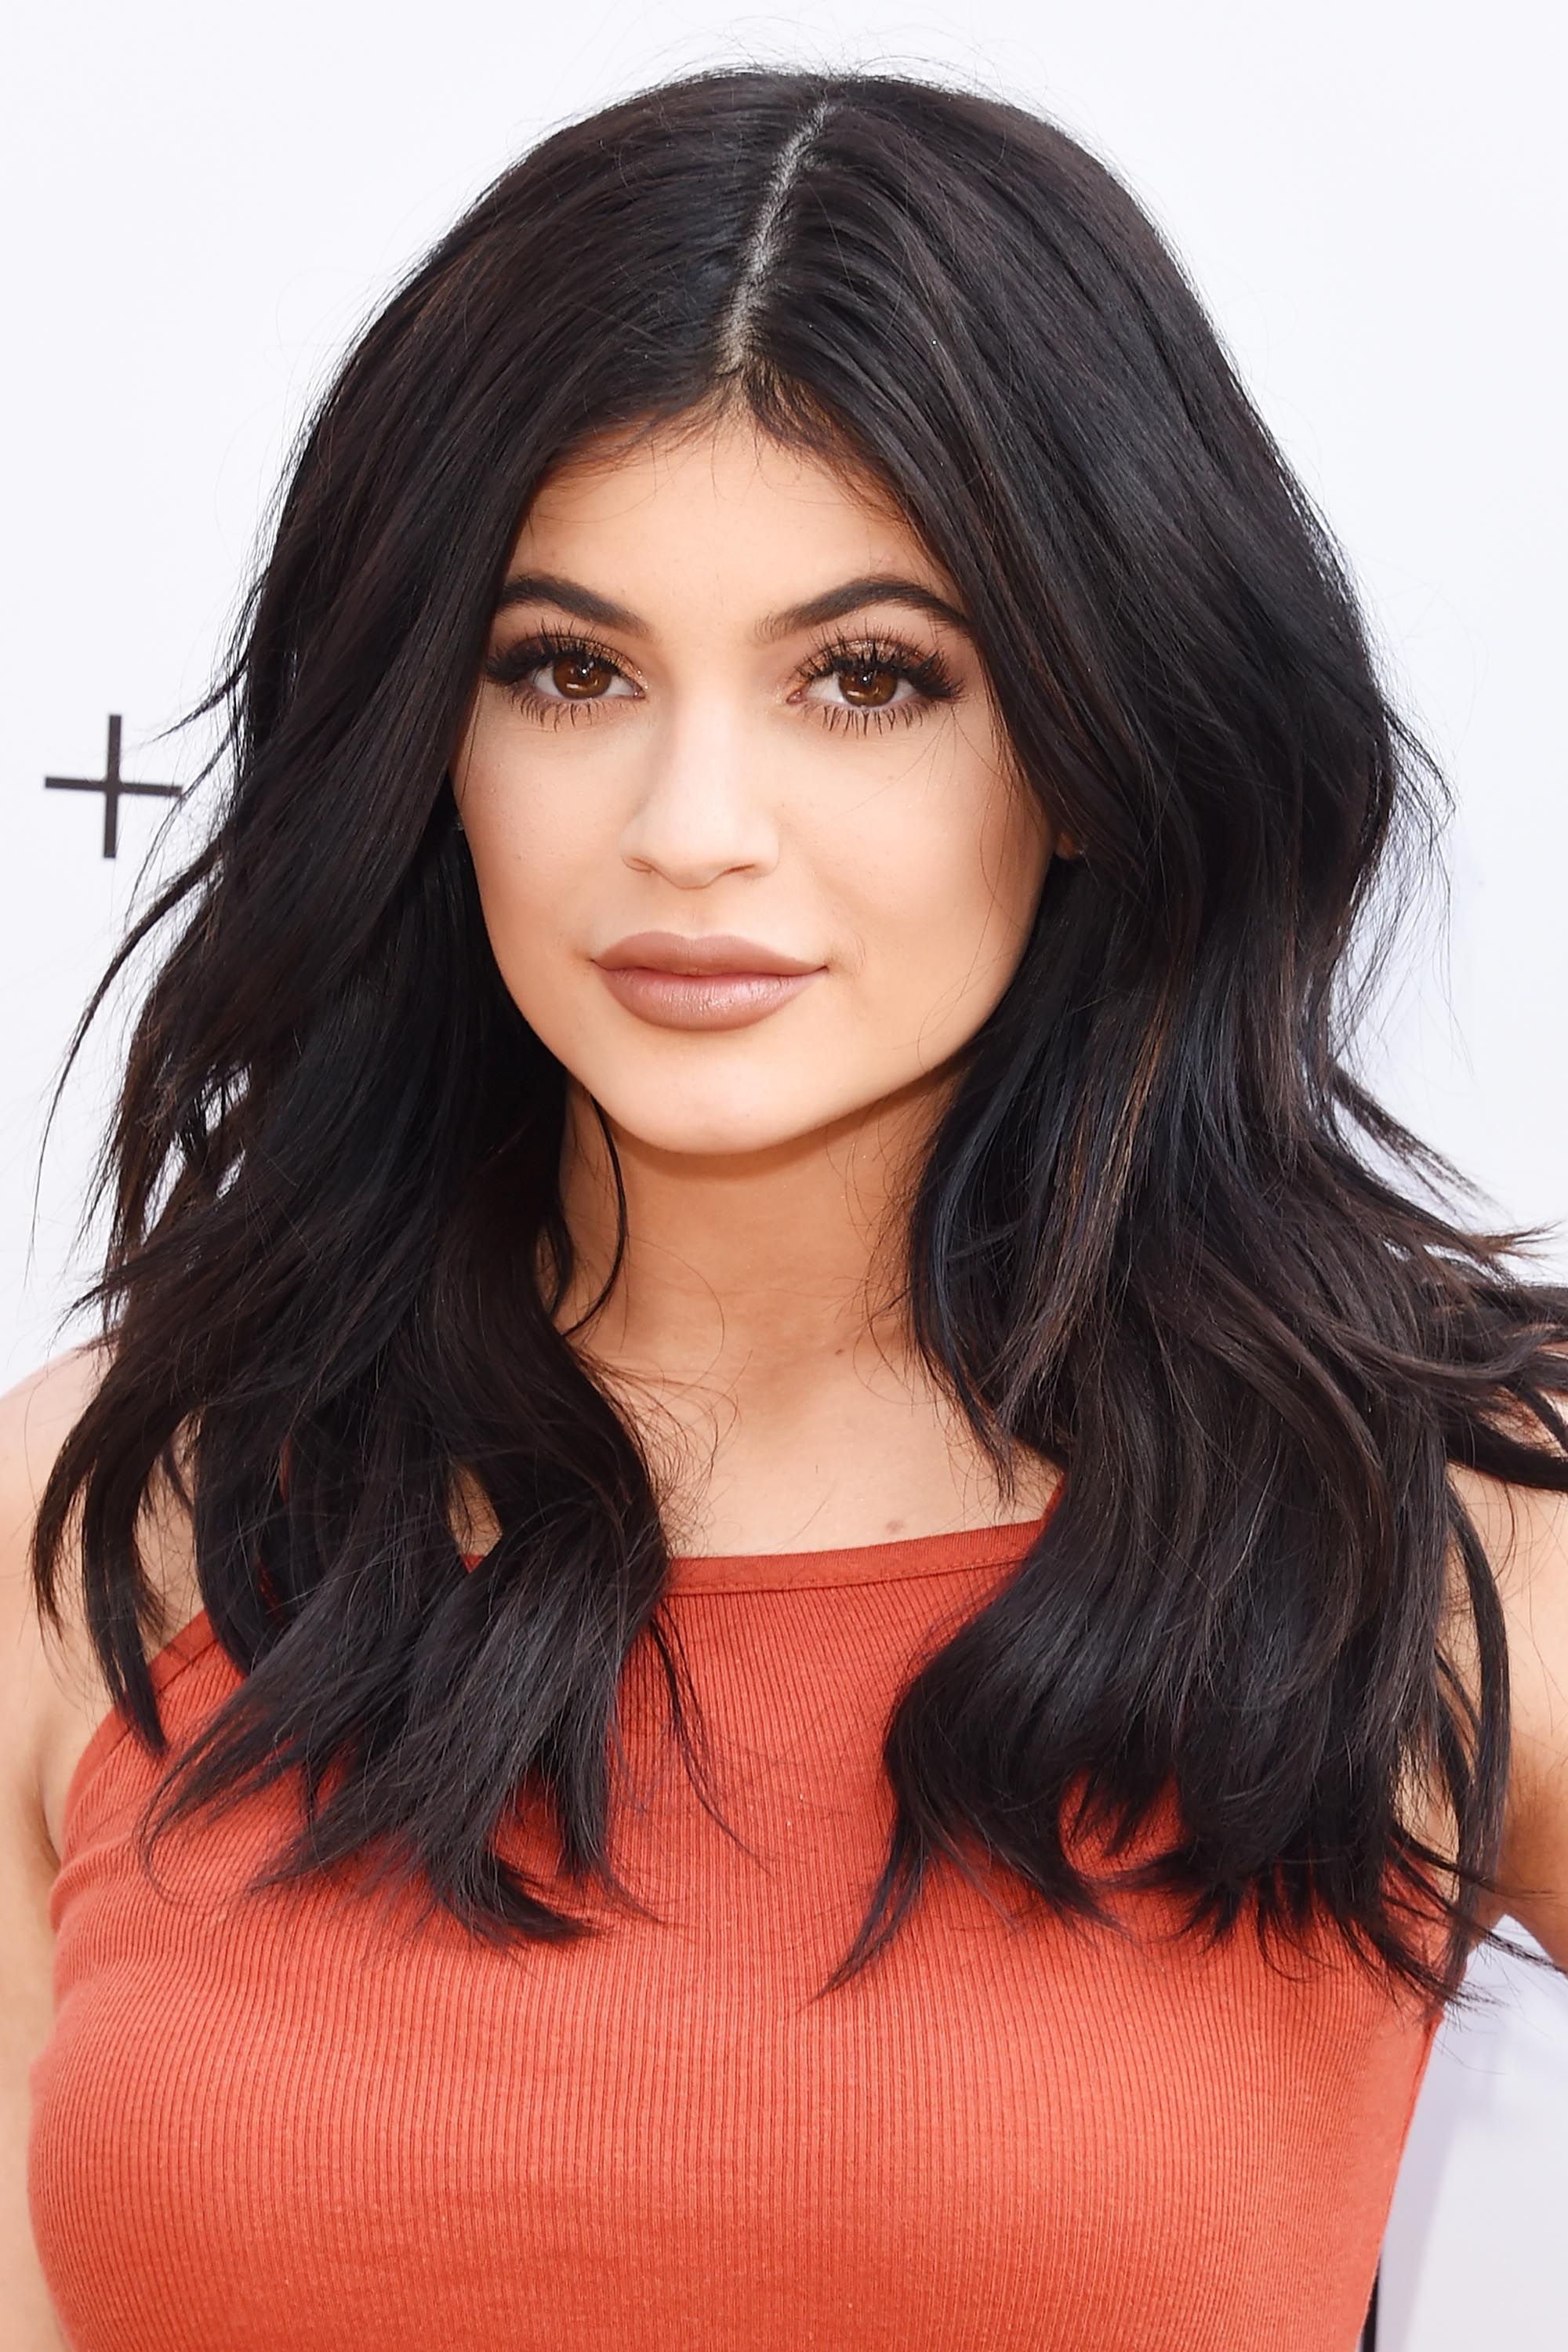 Kylie Jenner Best Hairstyles